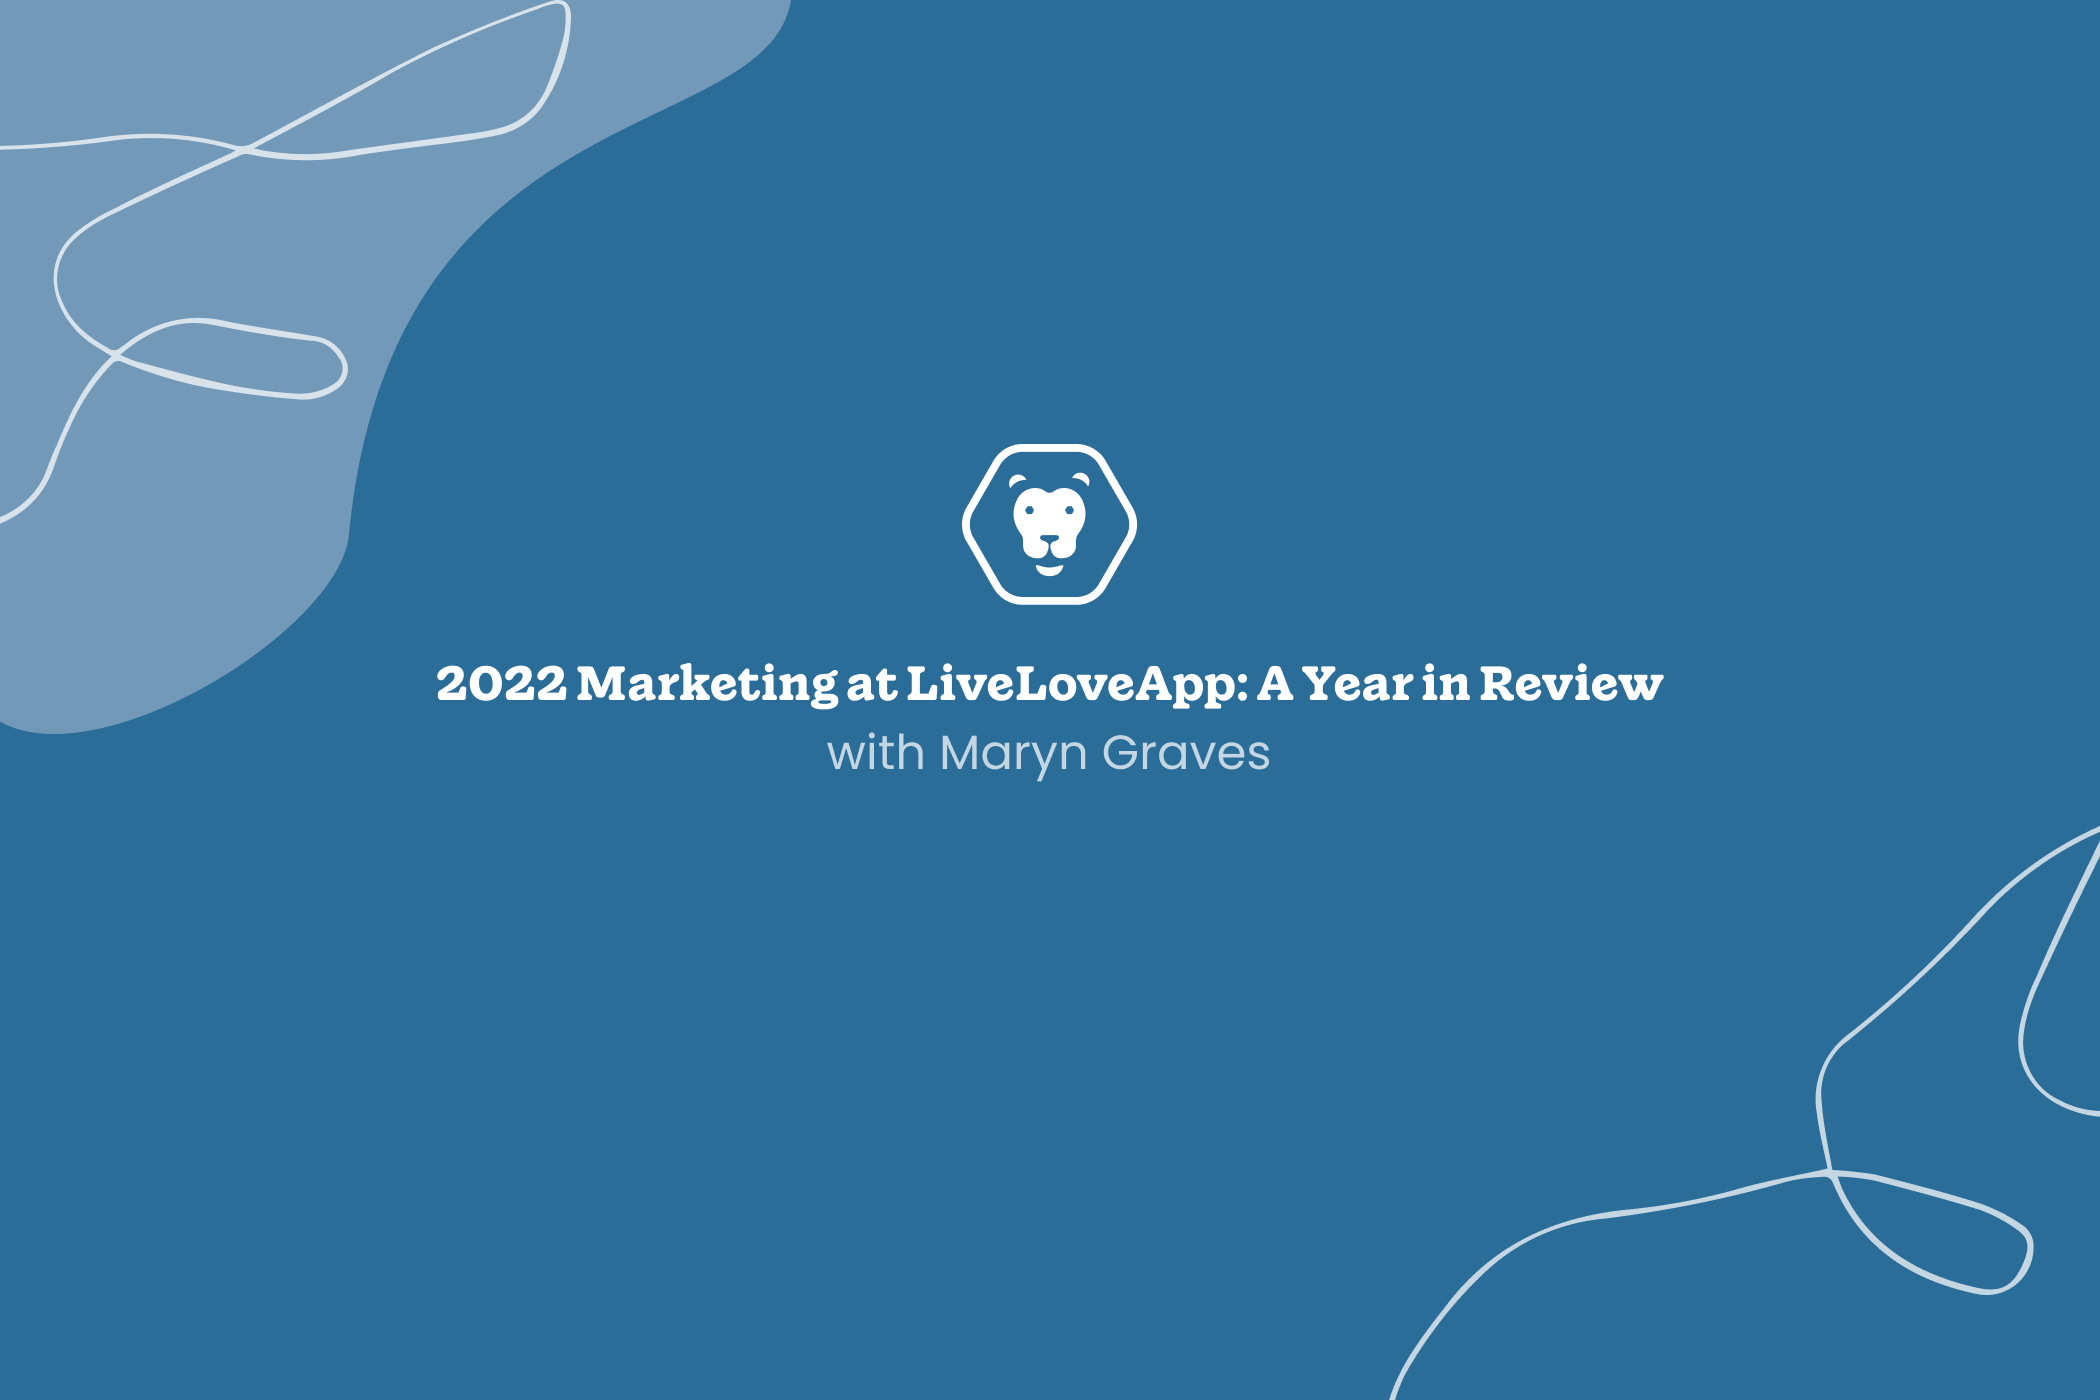 2022 Marketing at LiveLoveApp: A Year in Review